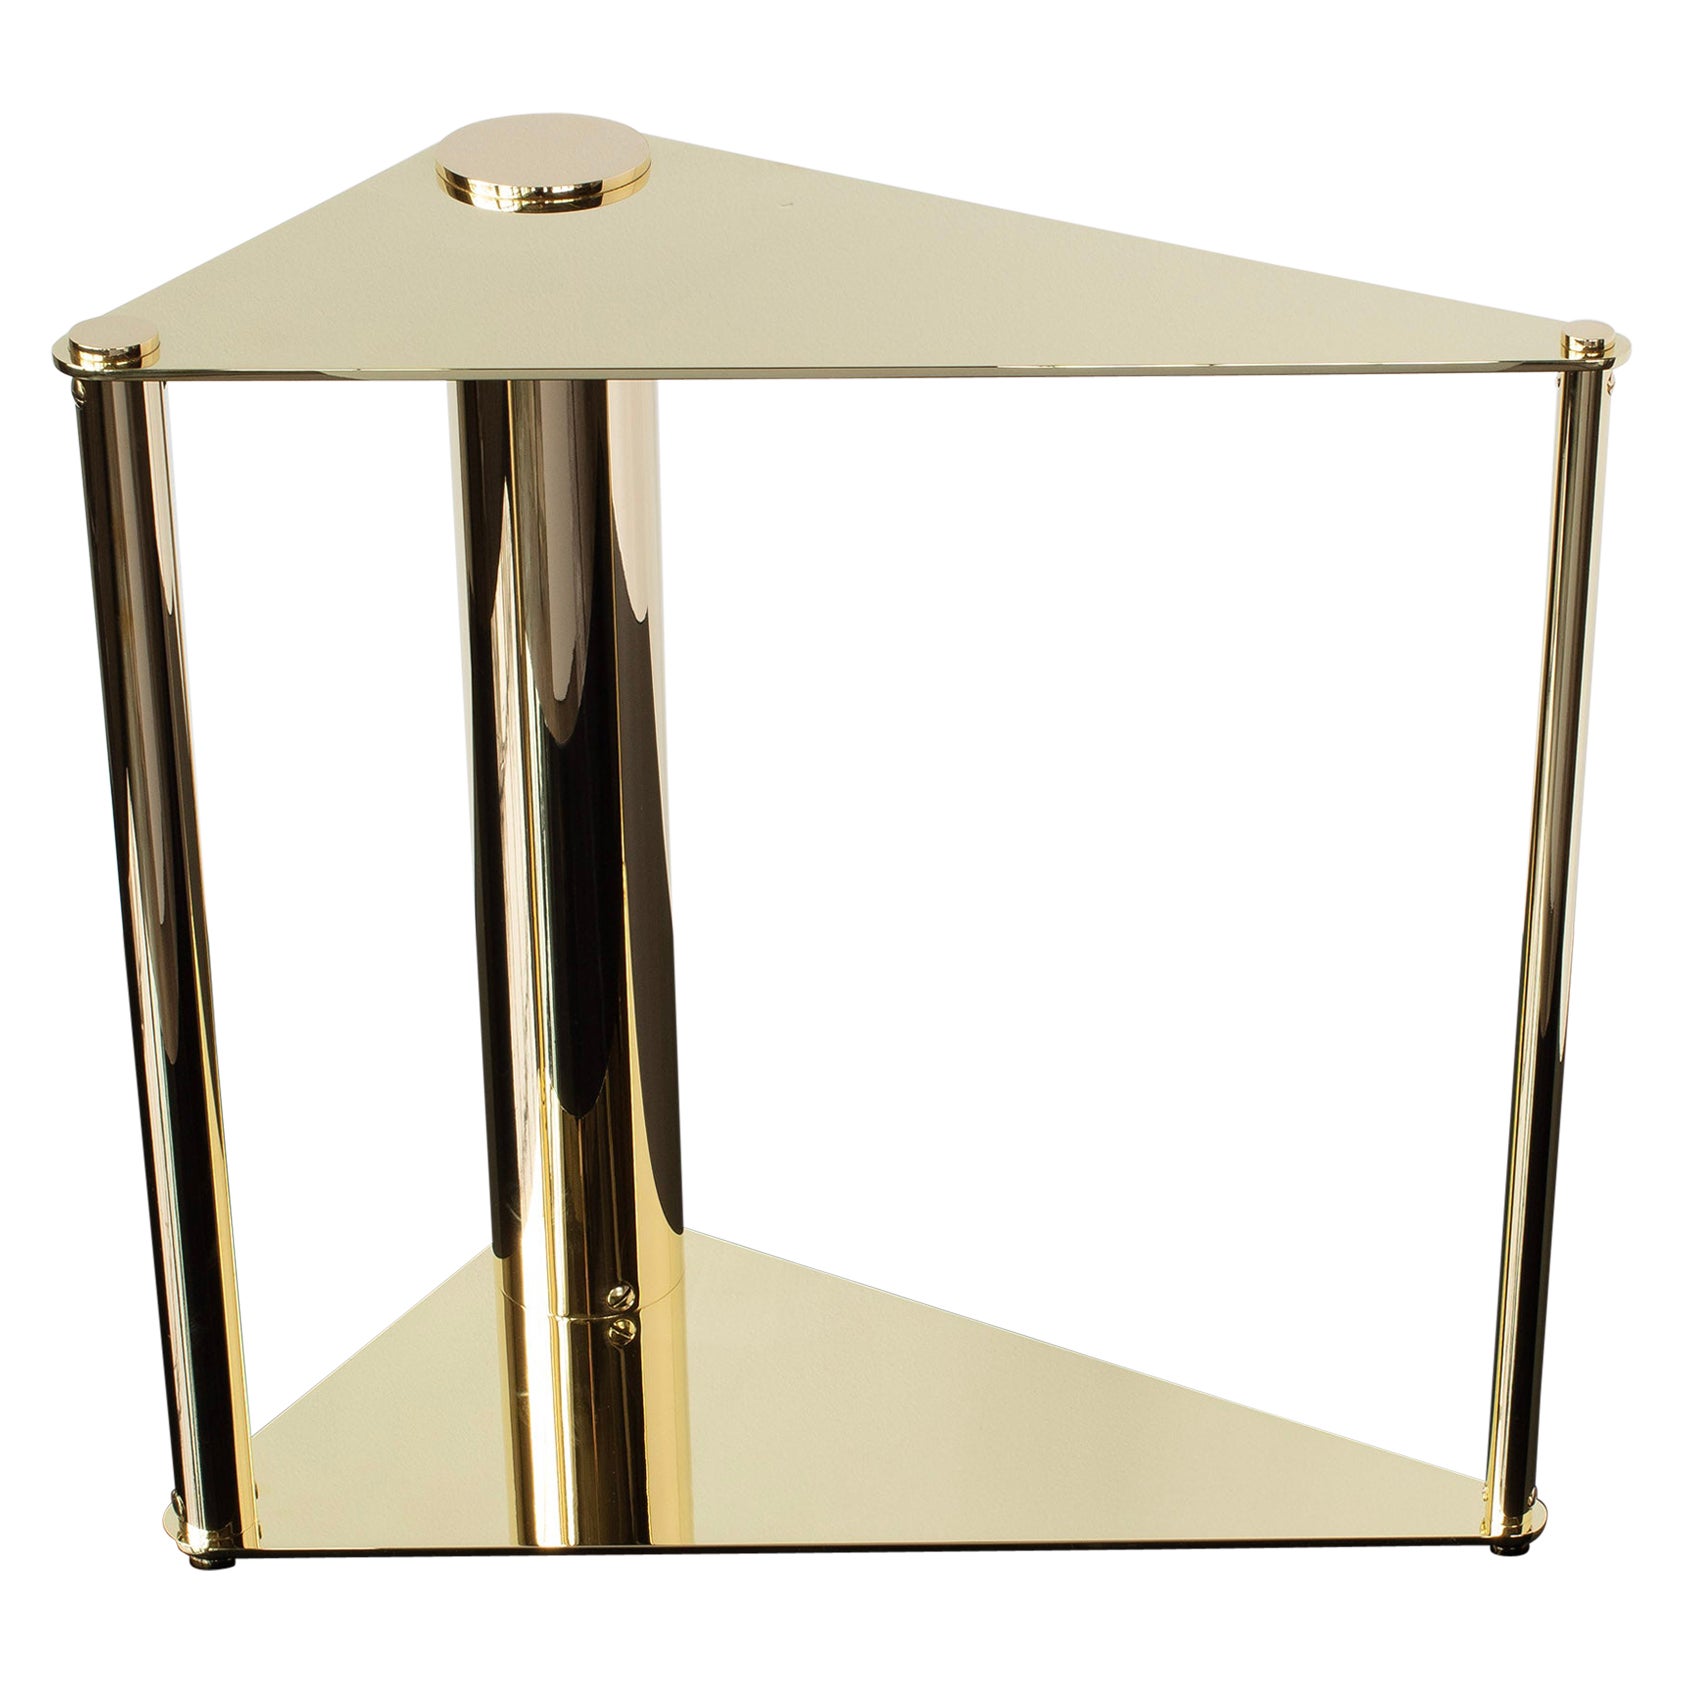 Untitled Side Table 3.0 Polished Brass Triangular Accent, End or Drink Tray For Sale